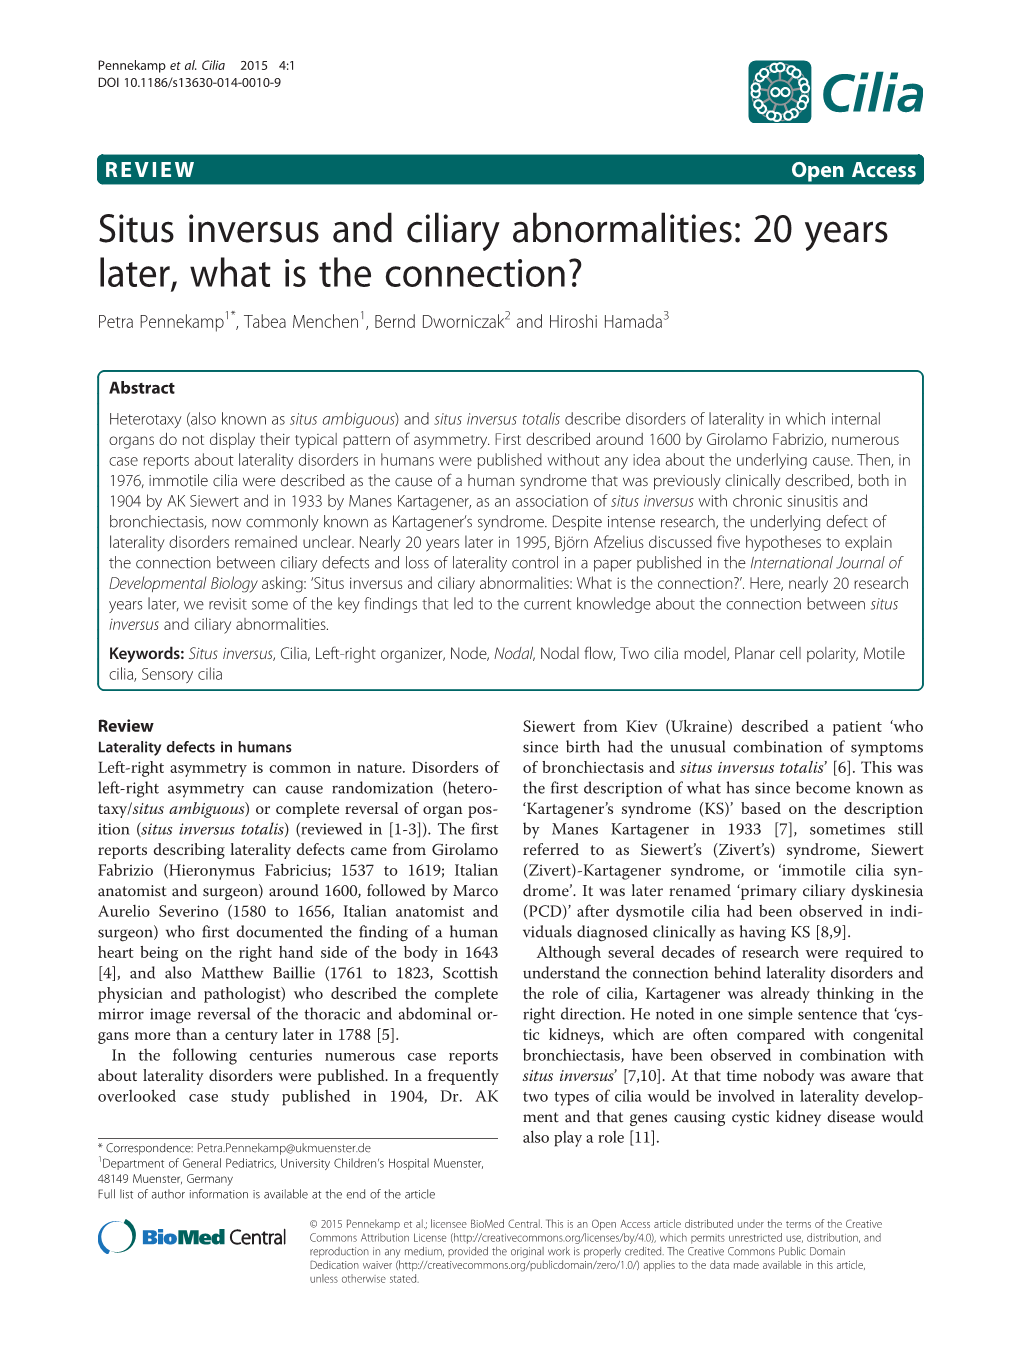 Situs Inversus and Ciliary Abnormalities: 20 Years Later, What Is the Connection? Petra Pennekamp1*, Tabea Menchen1, Bernd Dworniczak2 and Hiroshi Hamada3